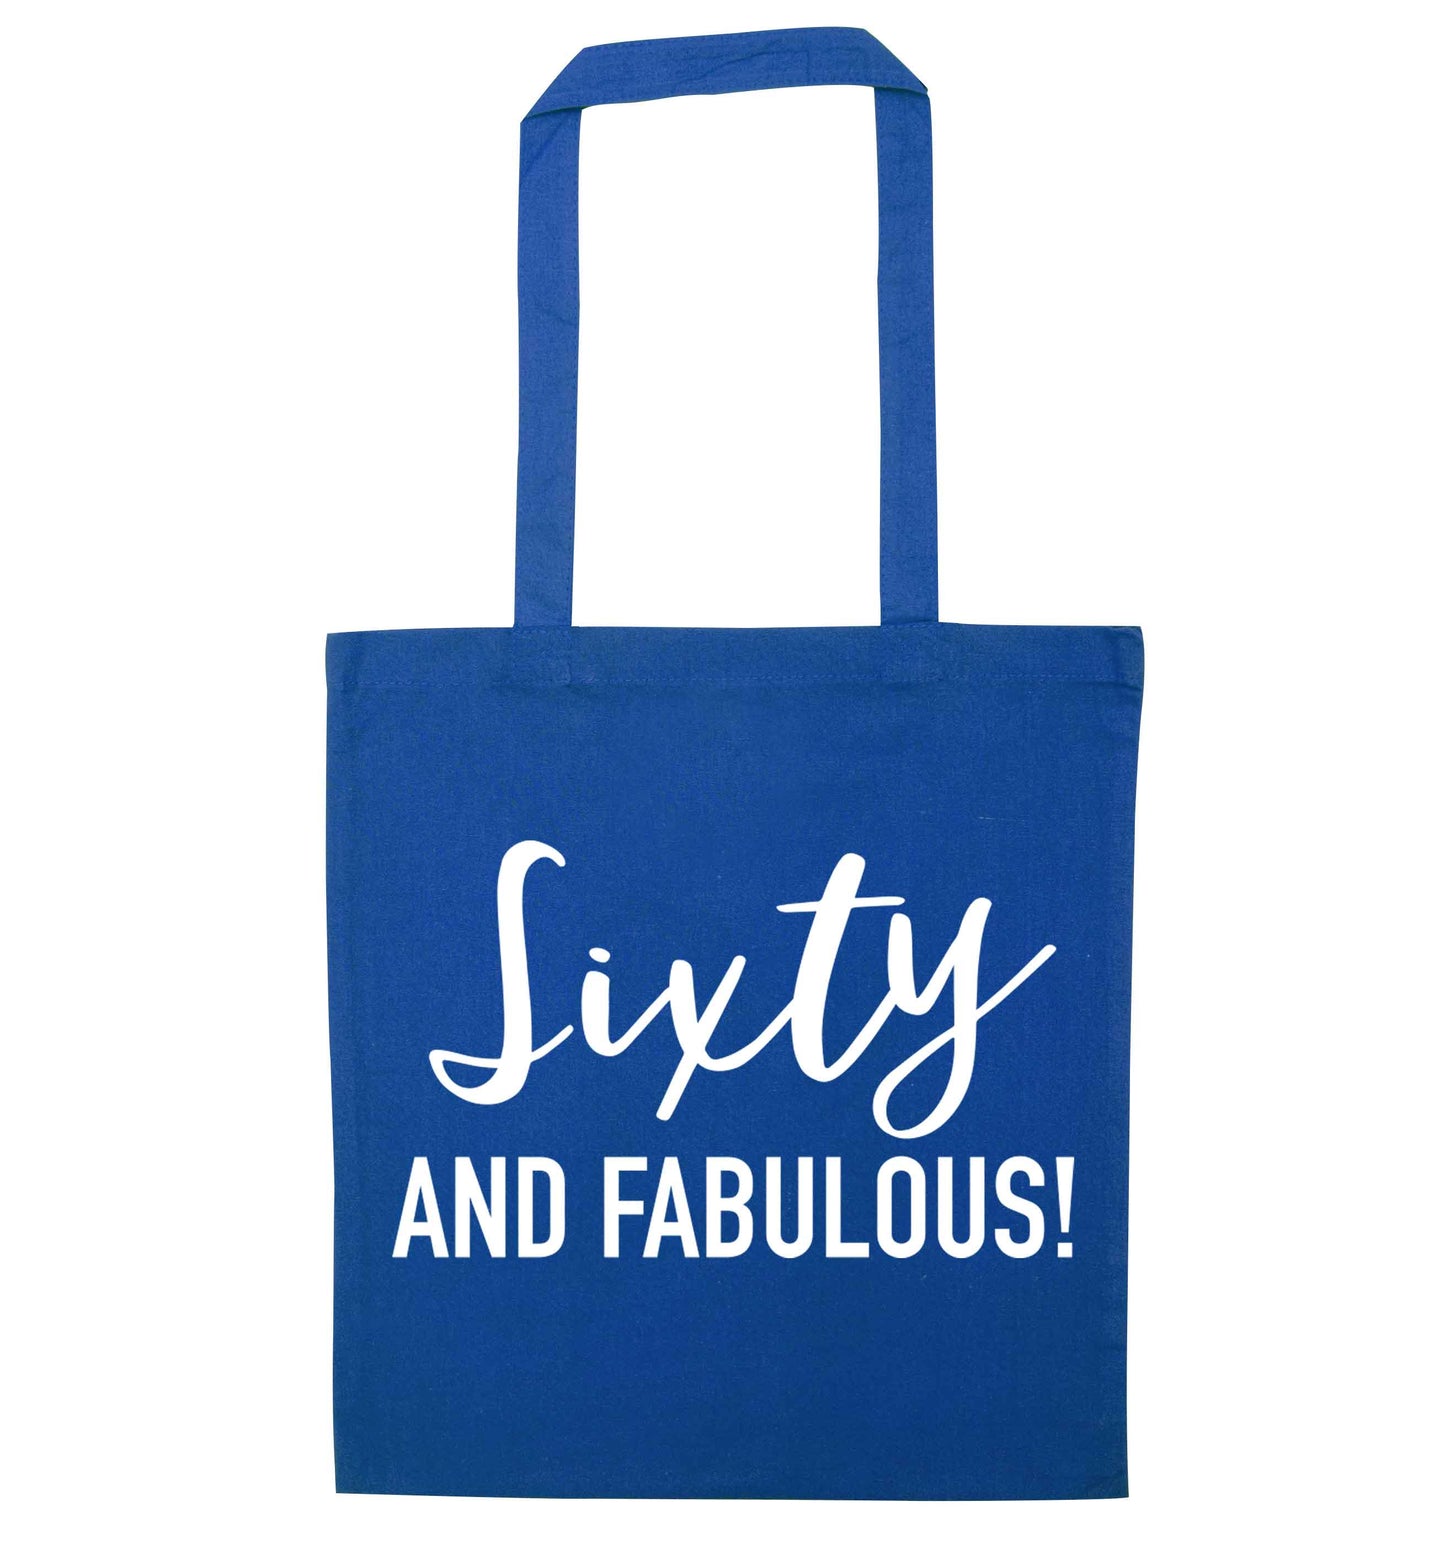 Sixty and fabulous blue tote bag